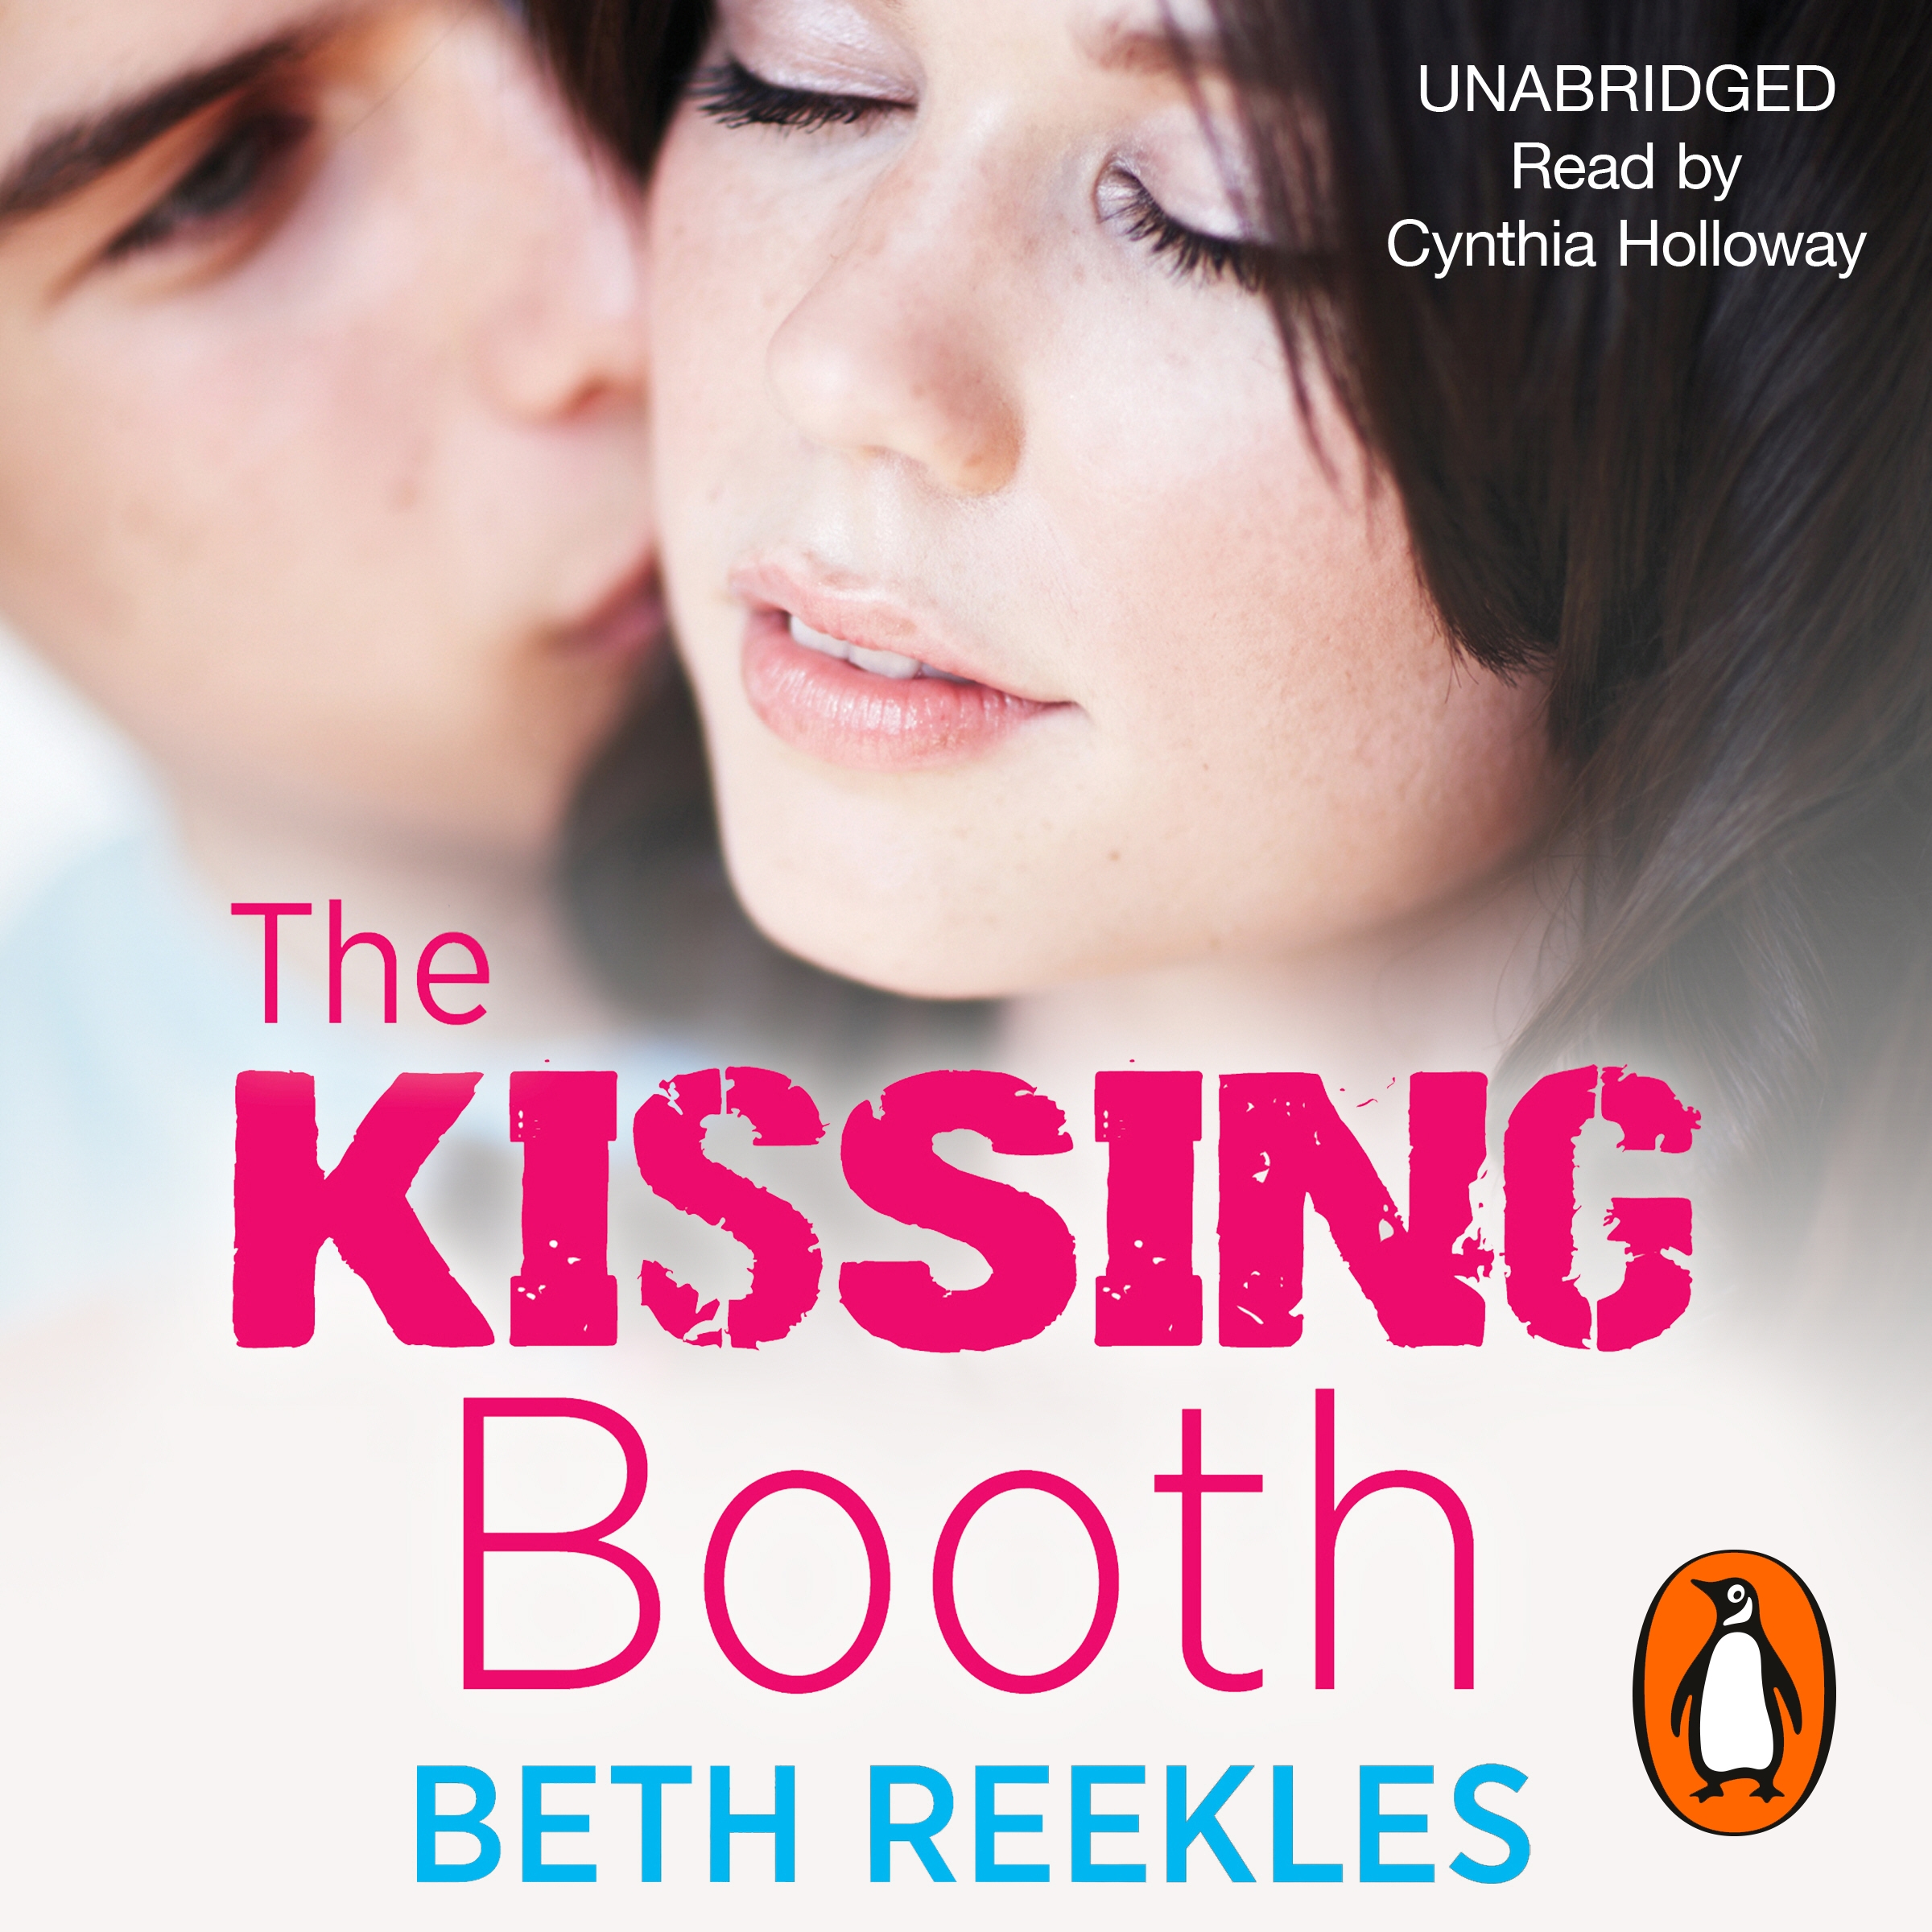 the kissing booth ebook download